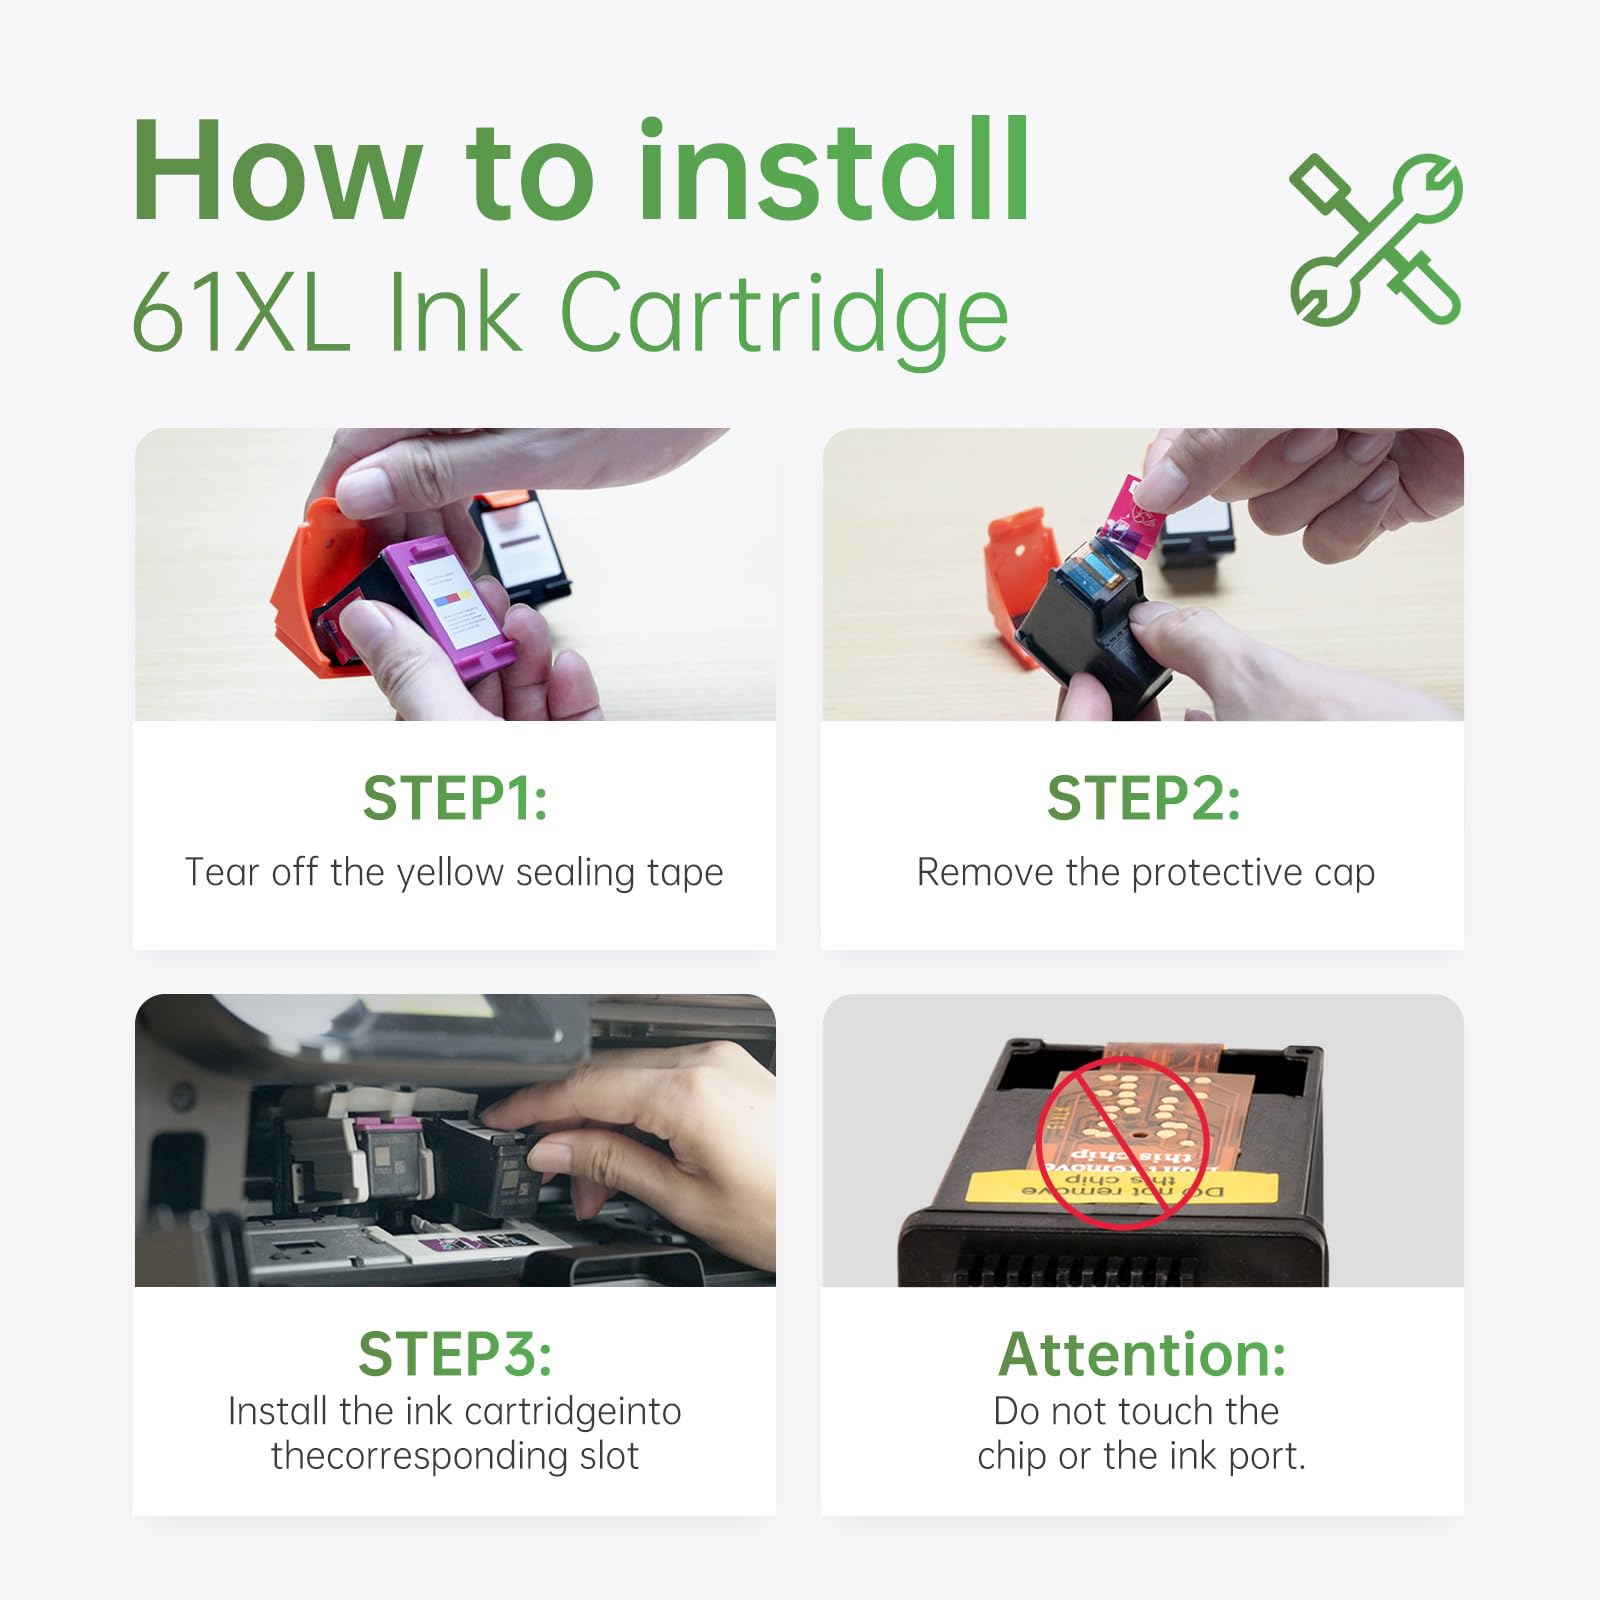 How to Install HP 61XL Ink Cartridge, Instructions: "Visual step-by-step guide on installing the LEMERO HP 61XL ink cartridge, including instructions to tear off the sealing tape, remove the protective cap, and install the cartridge into the printer without touching the chip."